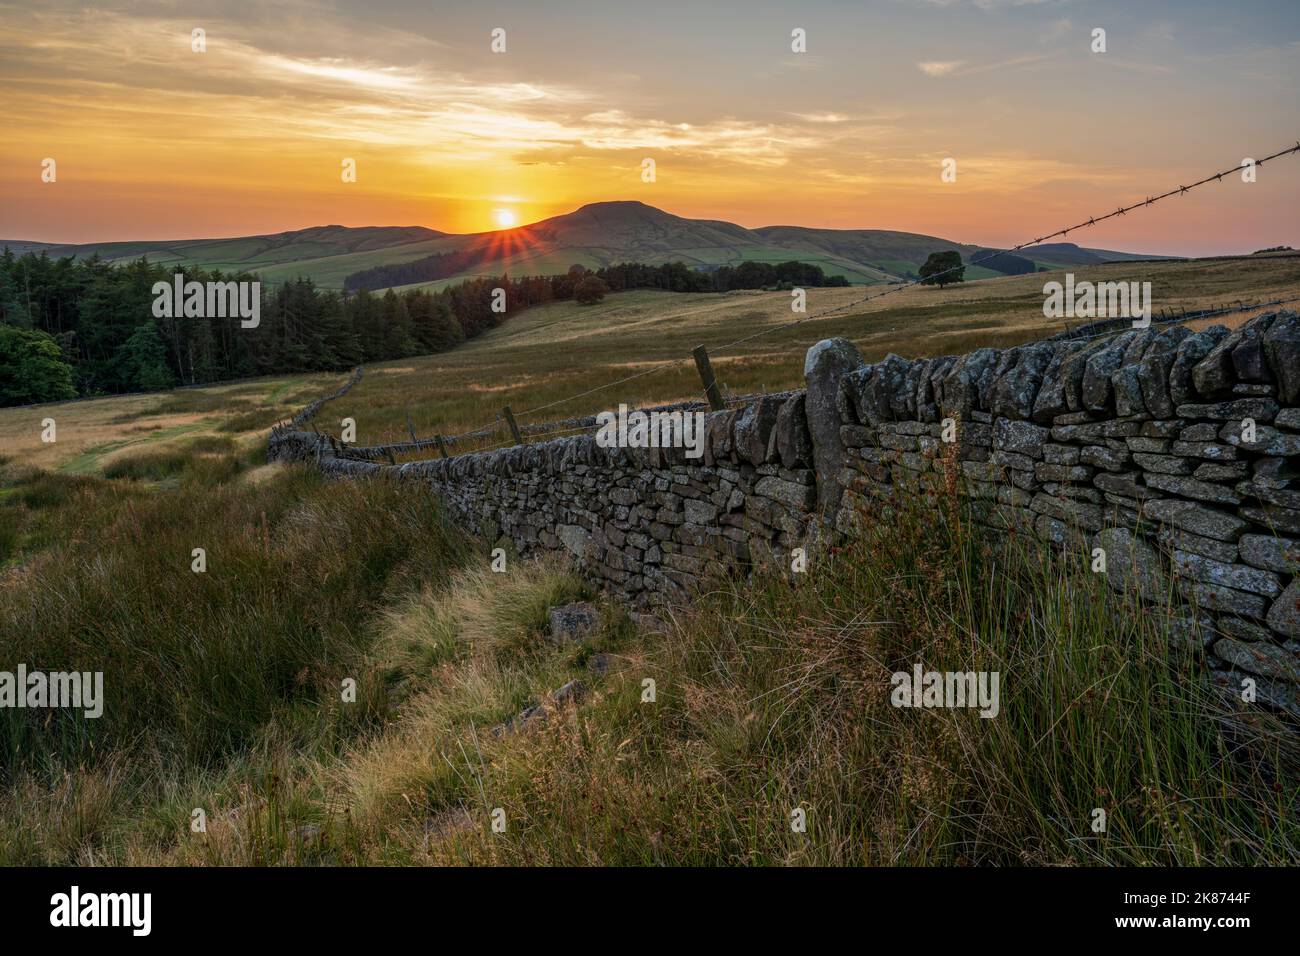 Shutlinsloe, known locally as the Cheshire Matterhorn, at sunset, Wildboarclough, Peak District, Cheshire, England, United Kingdom, Europe Stock Photo